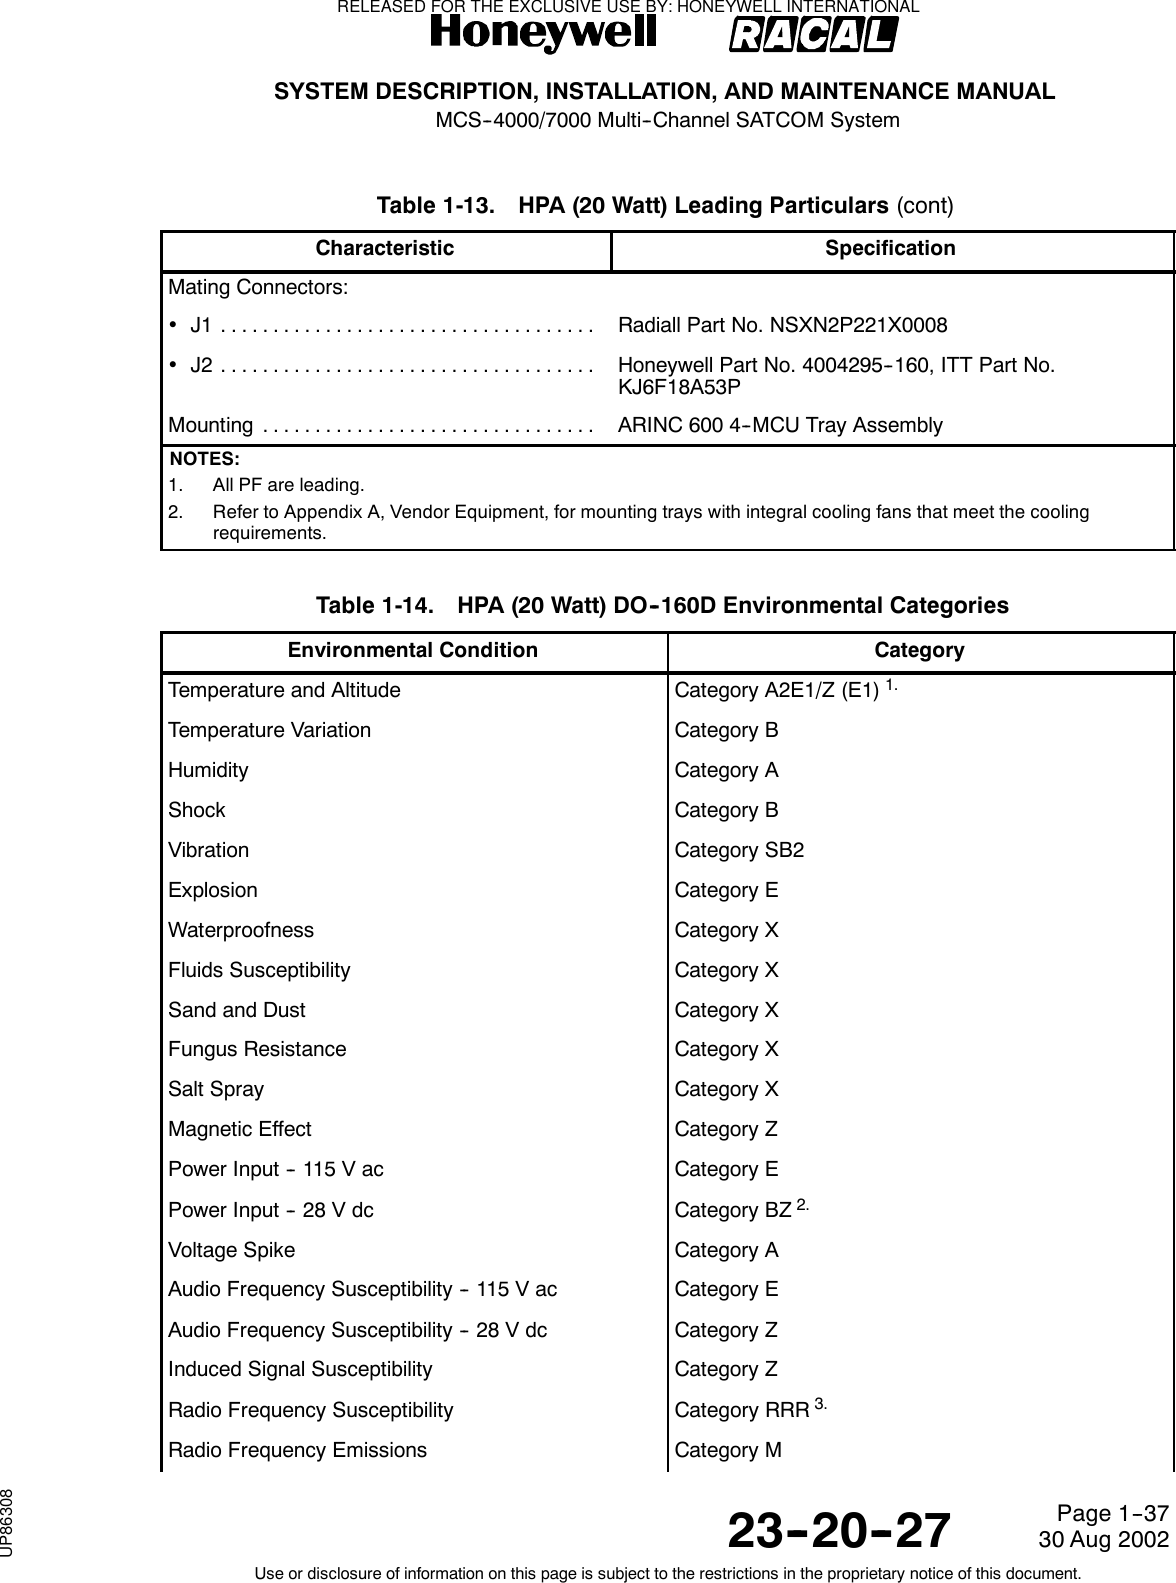 SYSTEM DESCRIPTION, INSTALLATION, AND MAINTENANCE MANUALMCS--4000/7000 Multi--Channel SATCOM System23--20--2730 Aug 2002Use or disclosure of information on this page is subject to the restrictions in the proprietary notice of this document.Page 1--37Table 1-13. HPA (20 Watt) Leading Particulars (cont)Characteristic SpecificationMating Connectors:•J1 .................................... Radiall Part No. NSXN2P221X0008•J2 .................................... Honeywell Part No. 4004295--160, ITT Part No.KJ6F18A53PMounting ................................ ARINC 600 4--MCU Tray AssemblyNOTES:1. All PF are leading.2. Refer to Appendix A, Vendor Equipment, for mounting trays with integral cooling fans that meet the coolingrequirements.Table 1-14. HPA (20 Watt) DO--160D Environmental CategoriesEnvironmental Condition CategoryTemperature and Altitude Category A2E1/Z (E1)1.Temperature Variation Category BHumidity Category AShock Category BVibration Category SB2Explosion Category EWaterproofness Category XFluids Susceptibility Category XSand and Dust Category XFungus Resistance Category XSalt Spray Category XMagnetic Effect Category ZPower Input -- 115 V ac Category EPower Input -- 28 V dc Category BZ2.Voltage Spike Category AAudio Frequency Susceptibility -- 115 V ac Category EAudio Frequency Susceptibility -- 28 V dc Category ZInduced Signal Susceptibility Category ZRadio Frequency Susceptibility Category RRR3.Radio Frequency Emissions Category MRELEASED FOR THE EXCLUSIVE USE BY: HONEYWELL INTERNATIONALUP86308